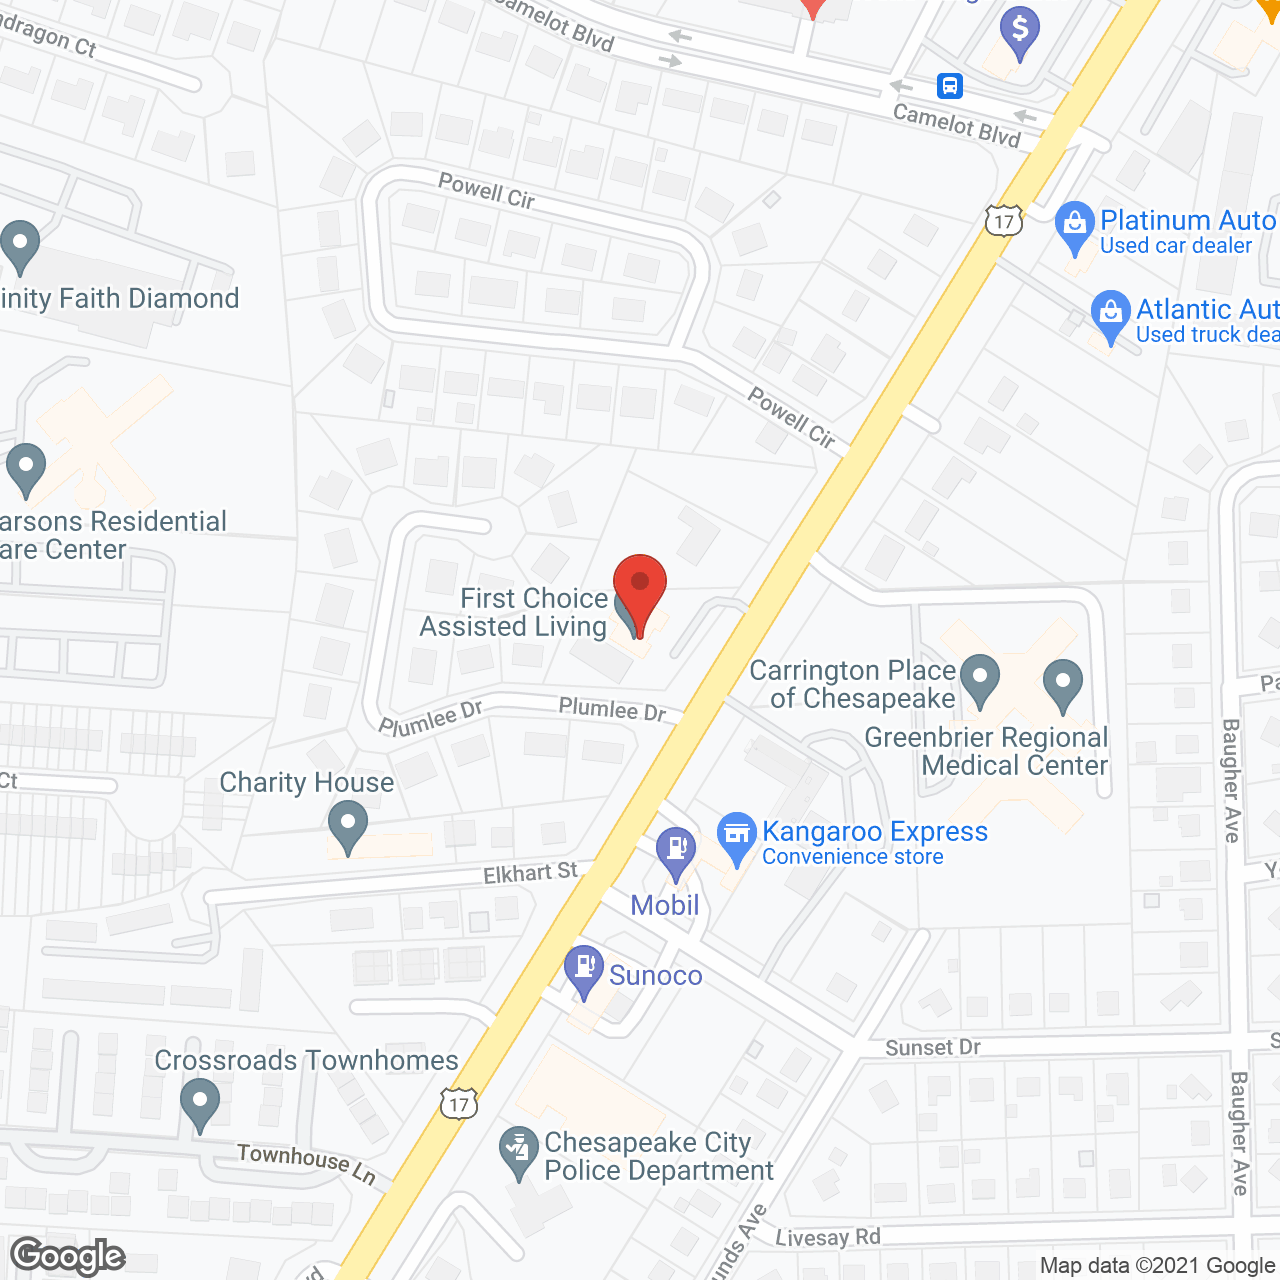 First Choice Assisted Living LLC in google map